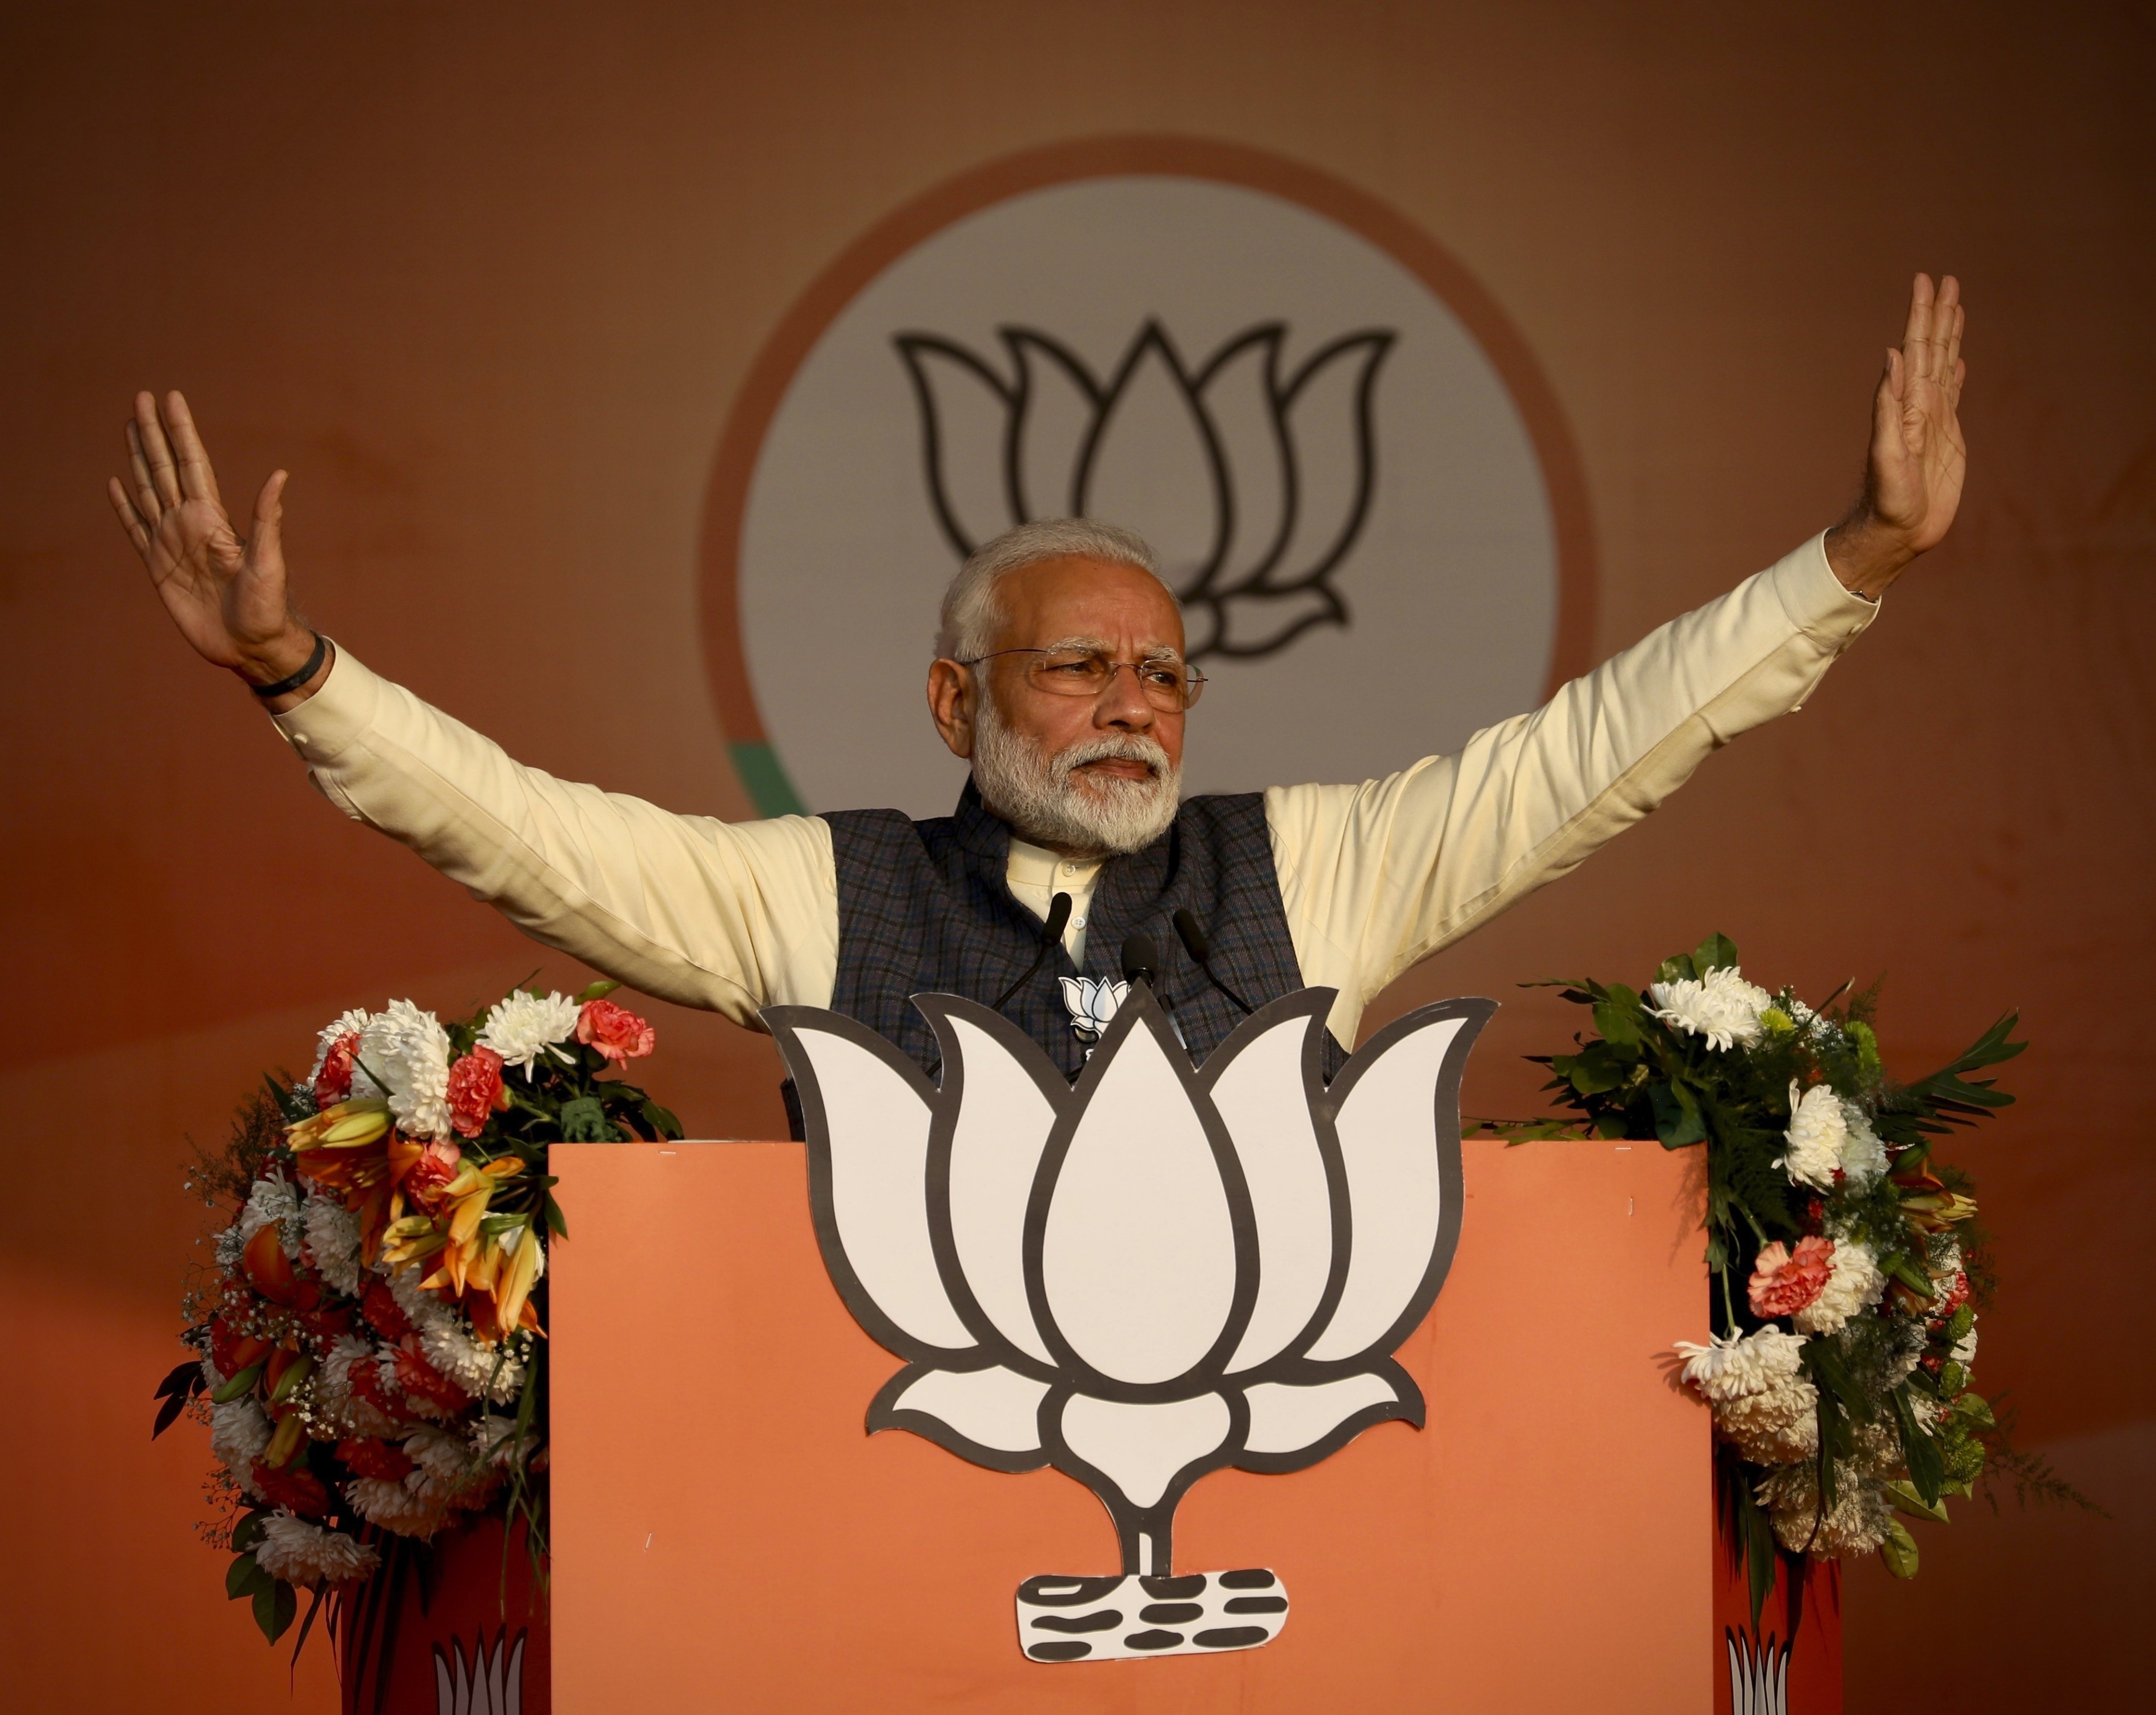 Prime Minister Narendra Modi’s party is set to introduce contentious new common personal laws that will apply across religions. Photo: AP